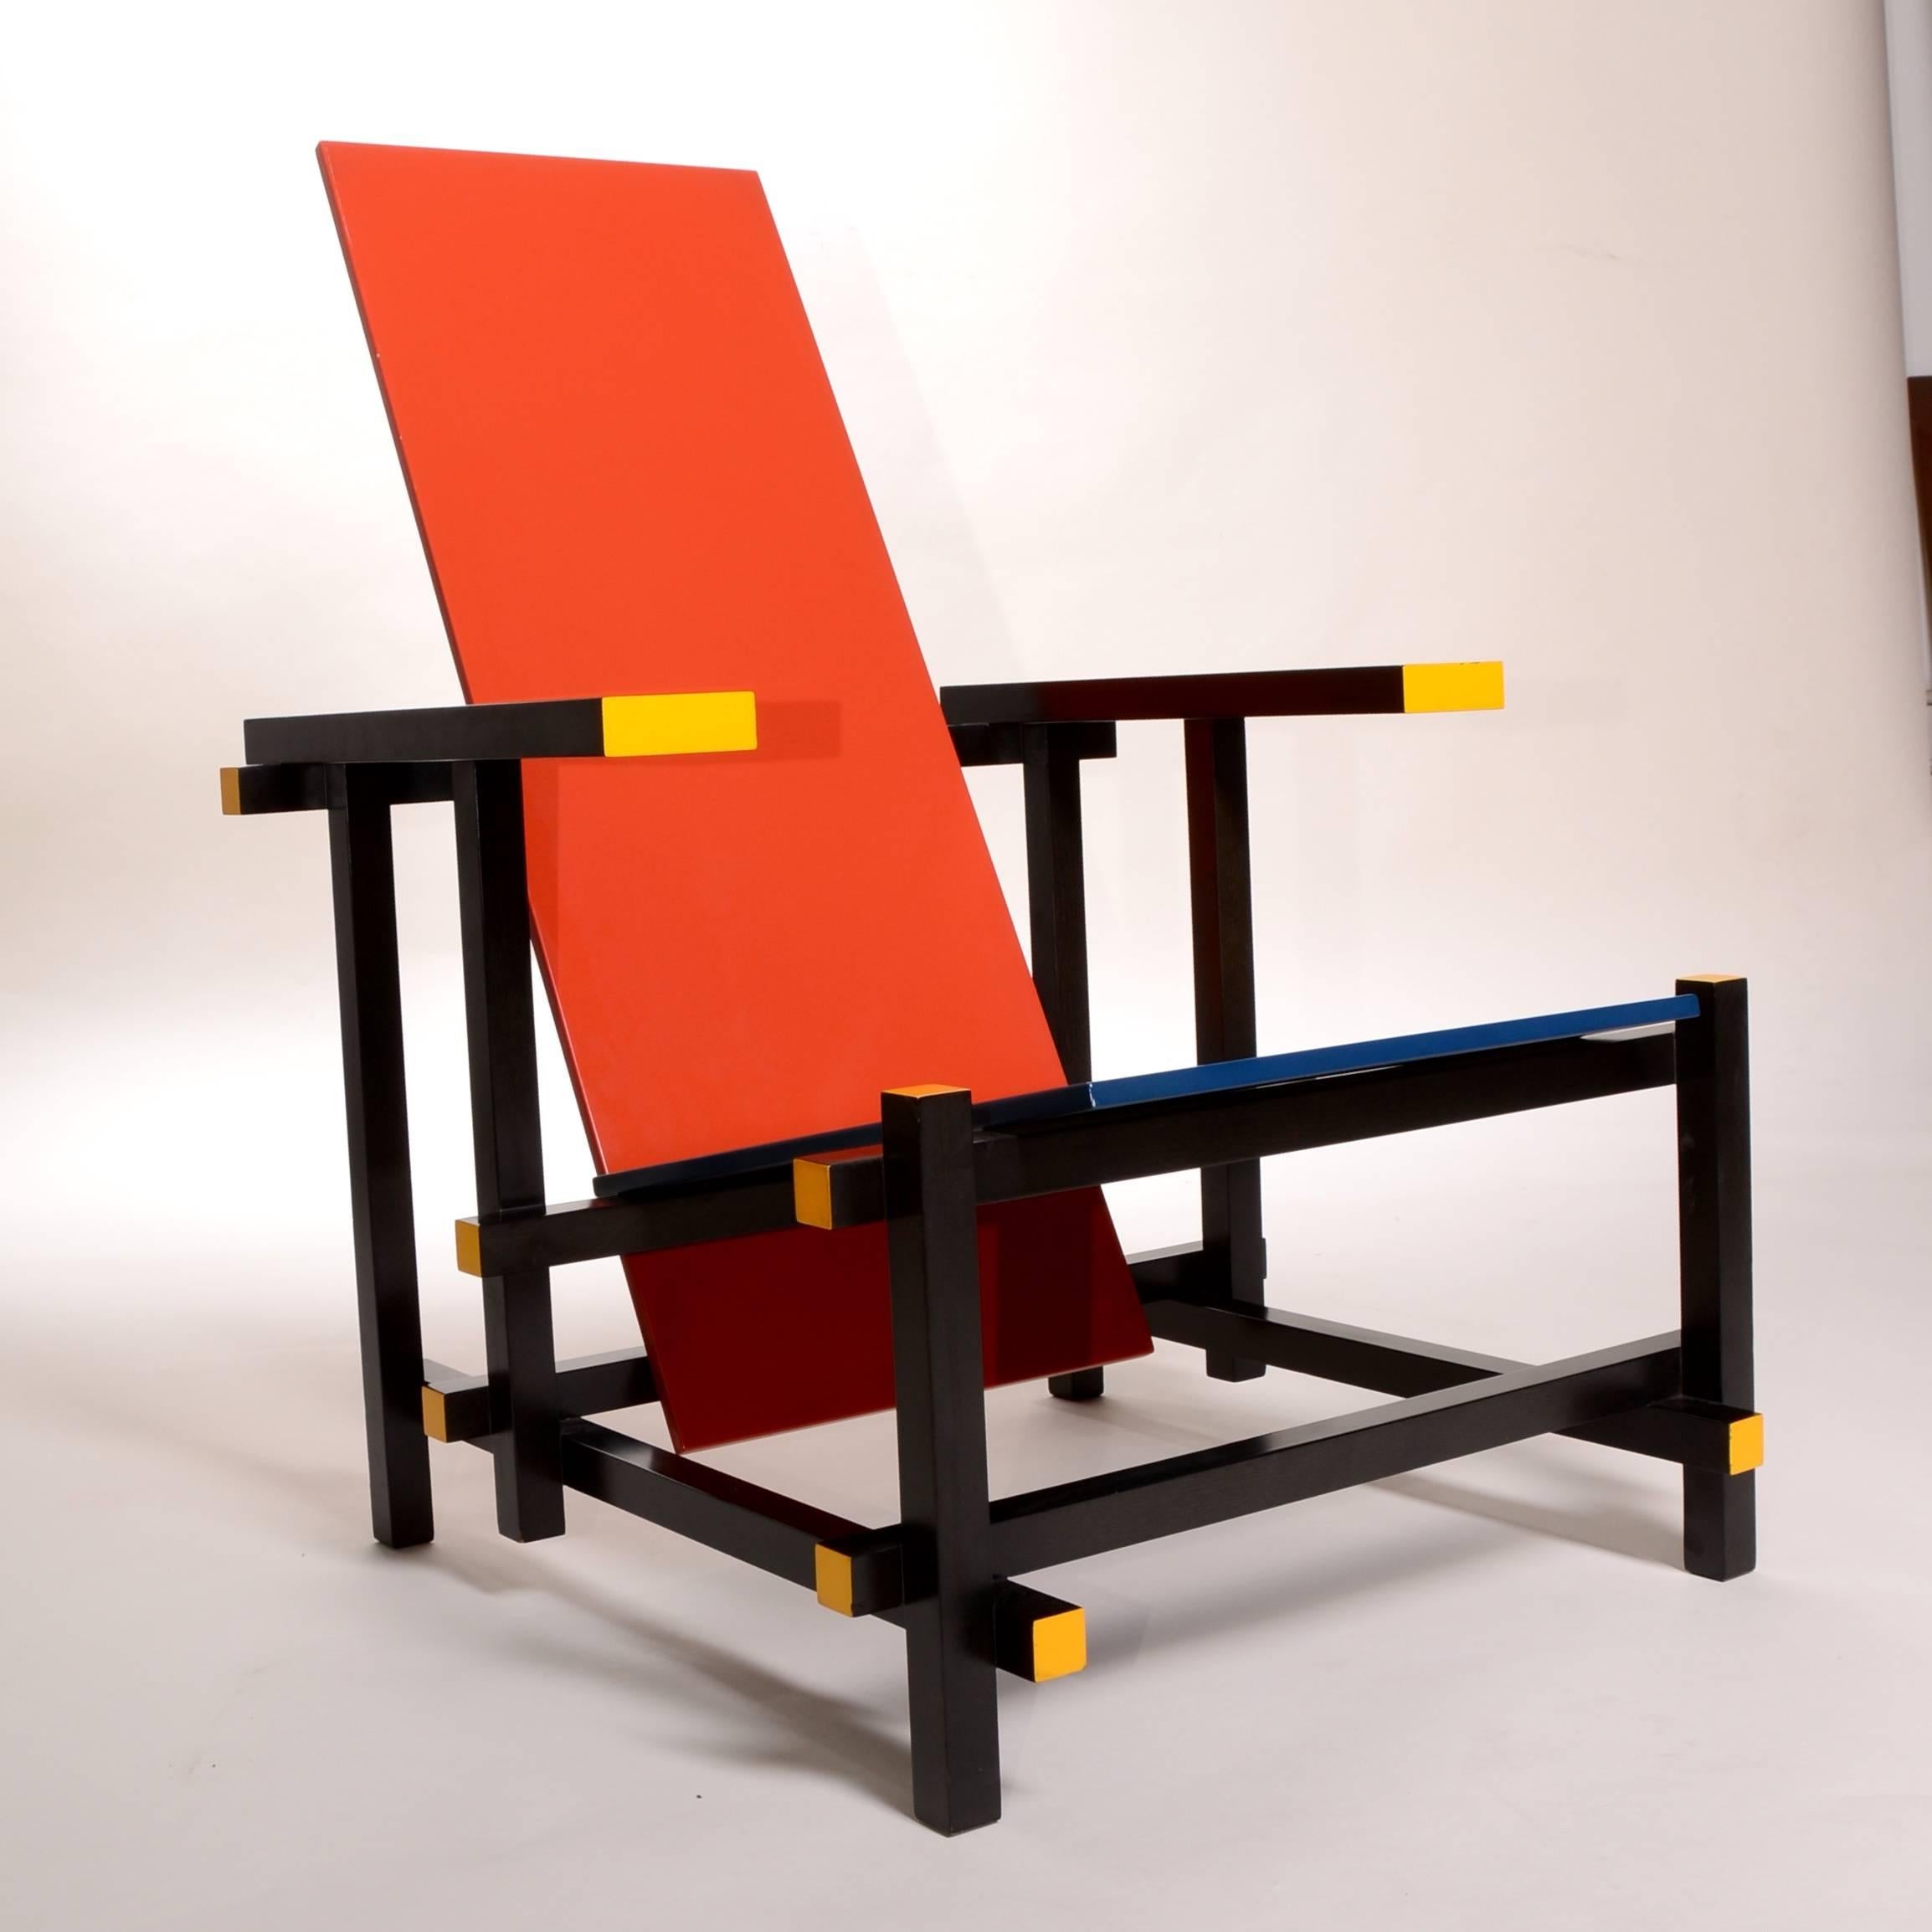 Modern Red and Blue Chair by Thomas Rietveld for Cassina